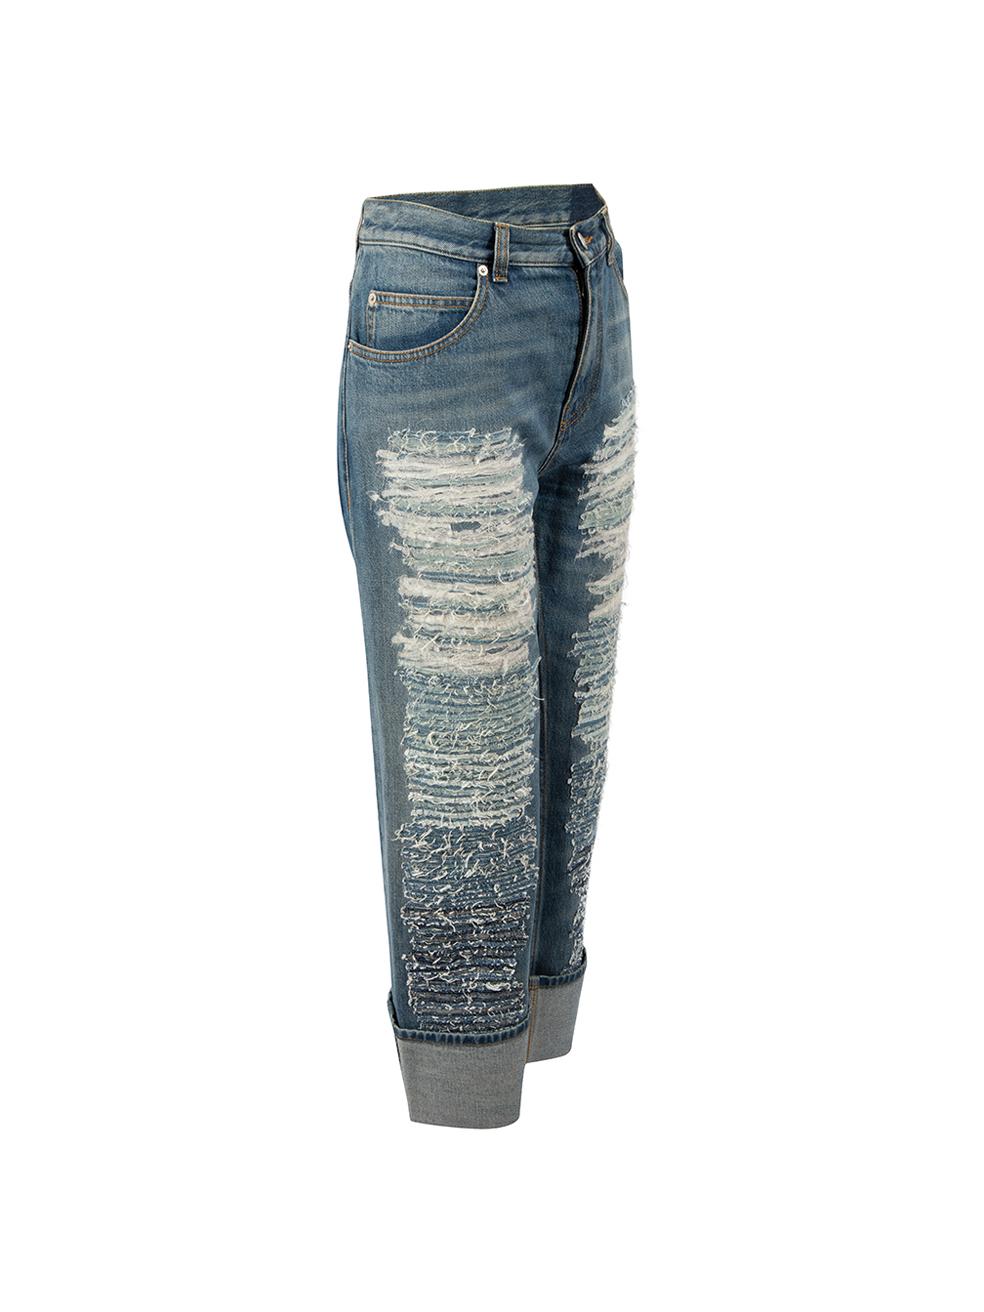 CONDITION is Very good. Hardly any visible wear to jeans is evident on this used Alexander McQueen designer resale item.



Details


Blue

Cotton

Boyfriend jeans

Cropped cuffs

Distressed embroidered detail

Fly zip and button fastening

3x Front